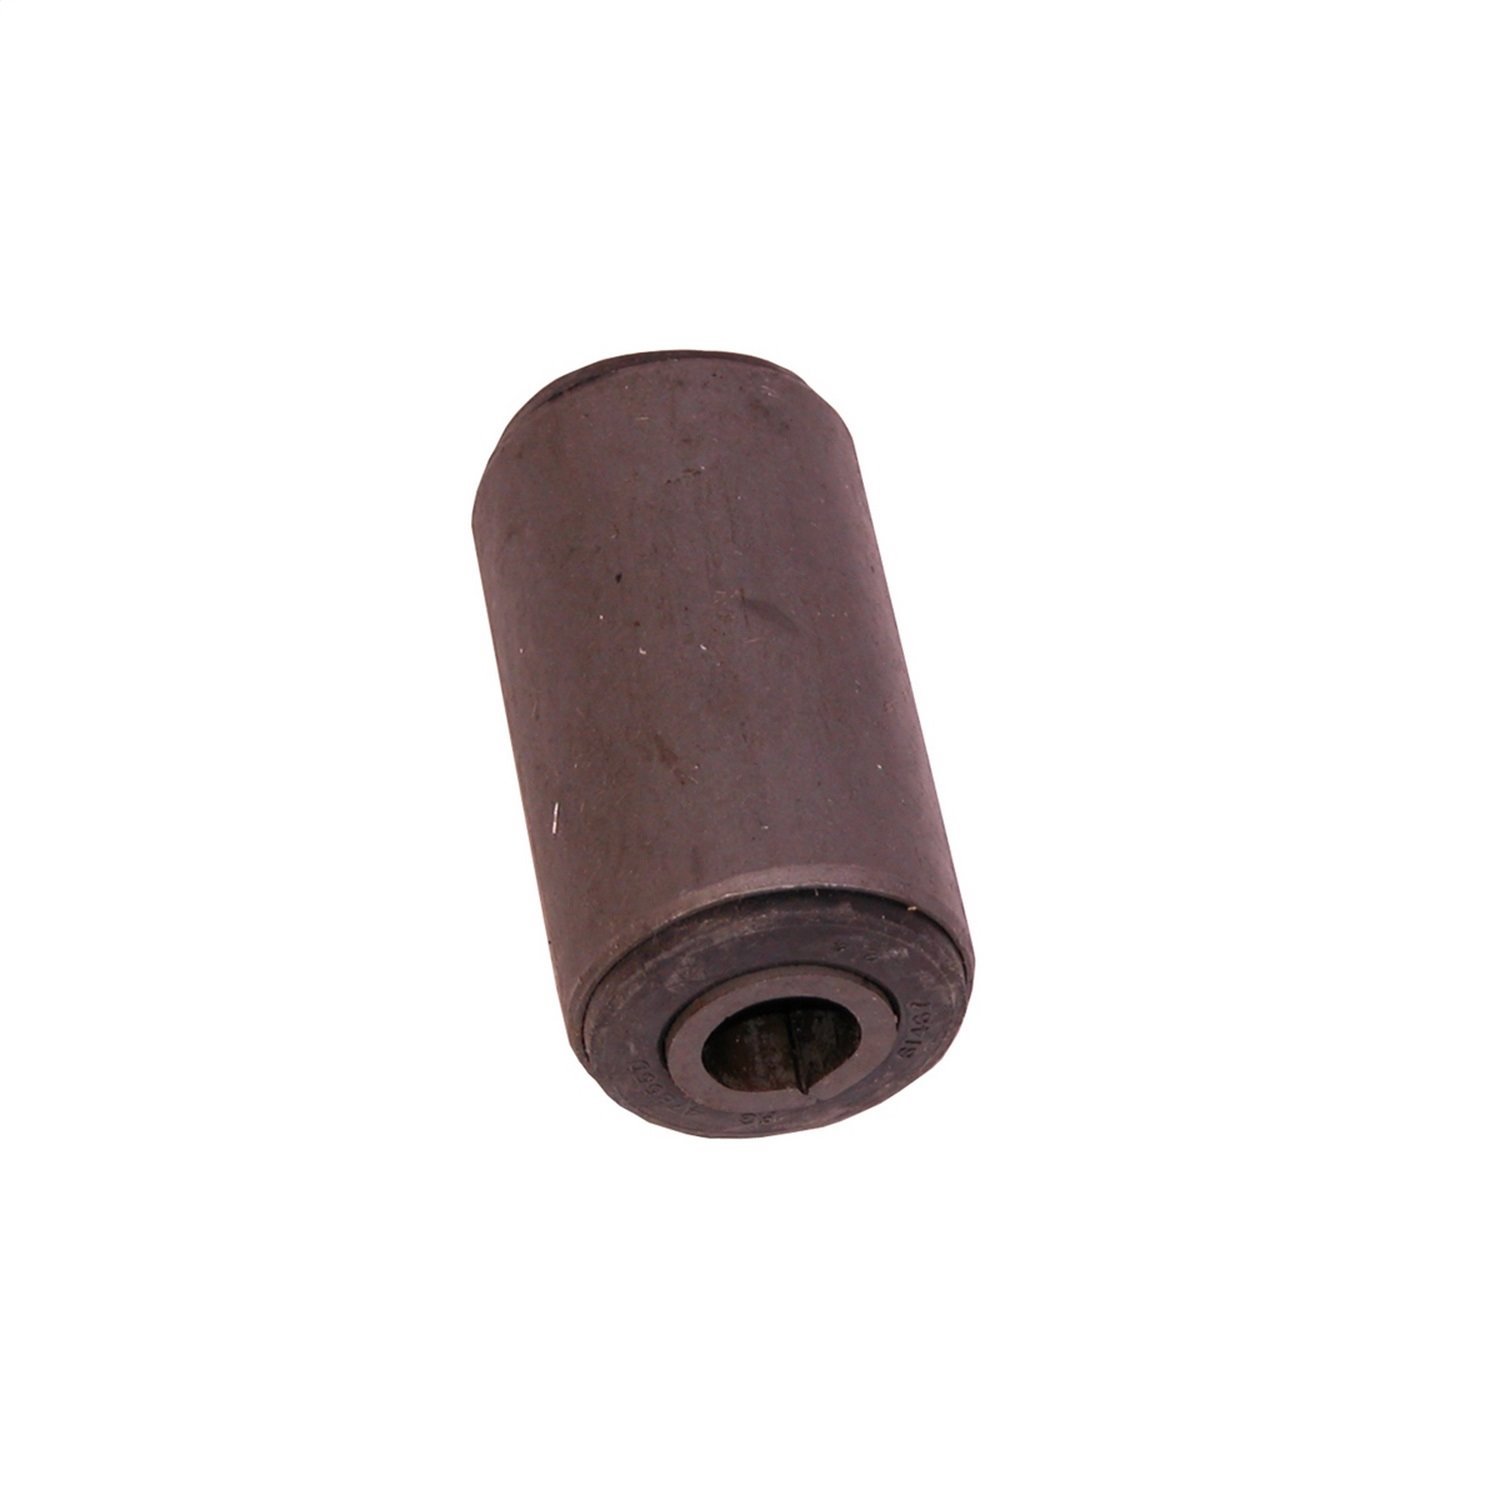 Replacement leaf spring bushing from Omix-ADA, Fits main eye on front or rear leaf sprin